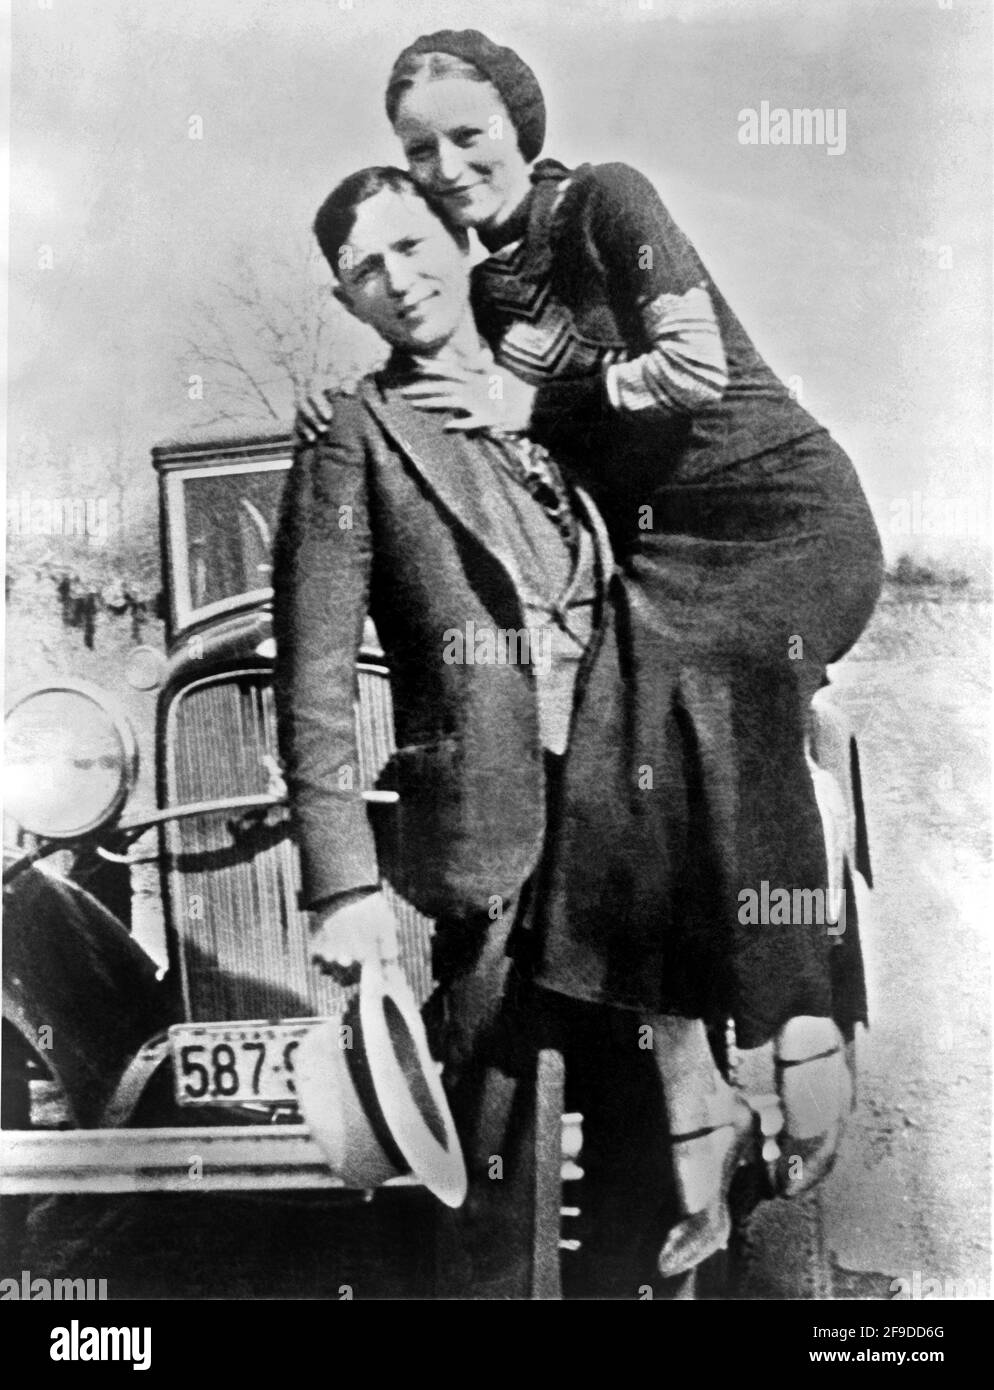 1934 , Arkansas , USA : The famous gangsterns  BONNIE PARKER  ( 1910 - 1934 ) and CLYDE BARROW ( 1909 - 1934 ). Contrary to popular belief the two never married. They were in a long standing relationship. Posing in front of a 1932 Ford V8 automobile where Bonnie and Clyde dead on May 23, 1934 . Unknown photographer . - OUTLAWS - KILLER - ASSASSINO - delinquente - criminalità organizzata  - GANGSTERN - Bos - CRONACA NERA - CRIMINALE - car - automobile - hat - cappello - embrace - abbraccio ---  Archivio GBB Stock Photo